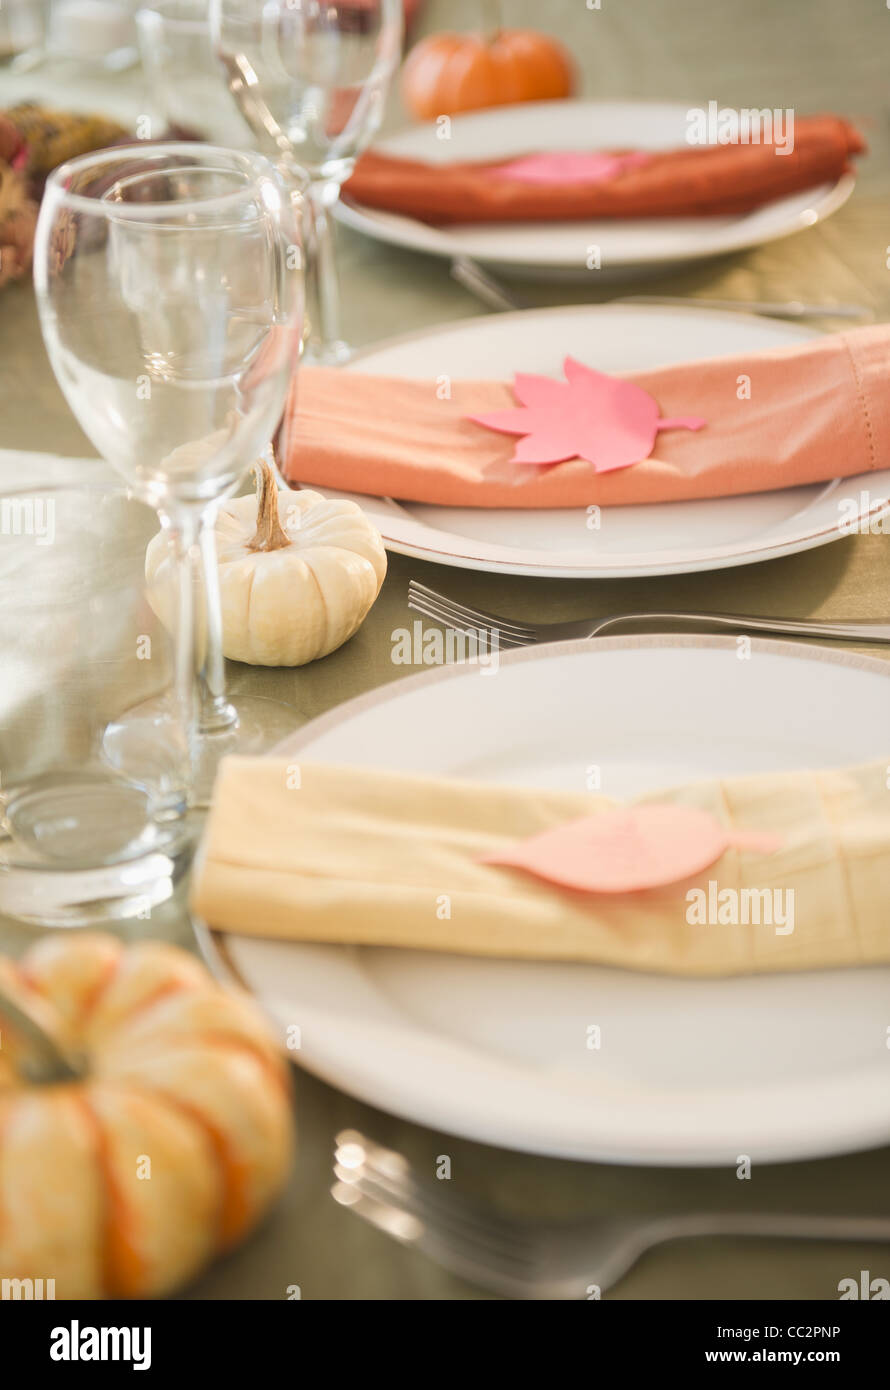 USA, New Jersey, Jersey City, Close up of table setting Stock Photo